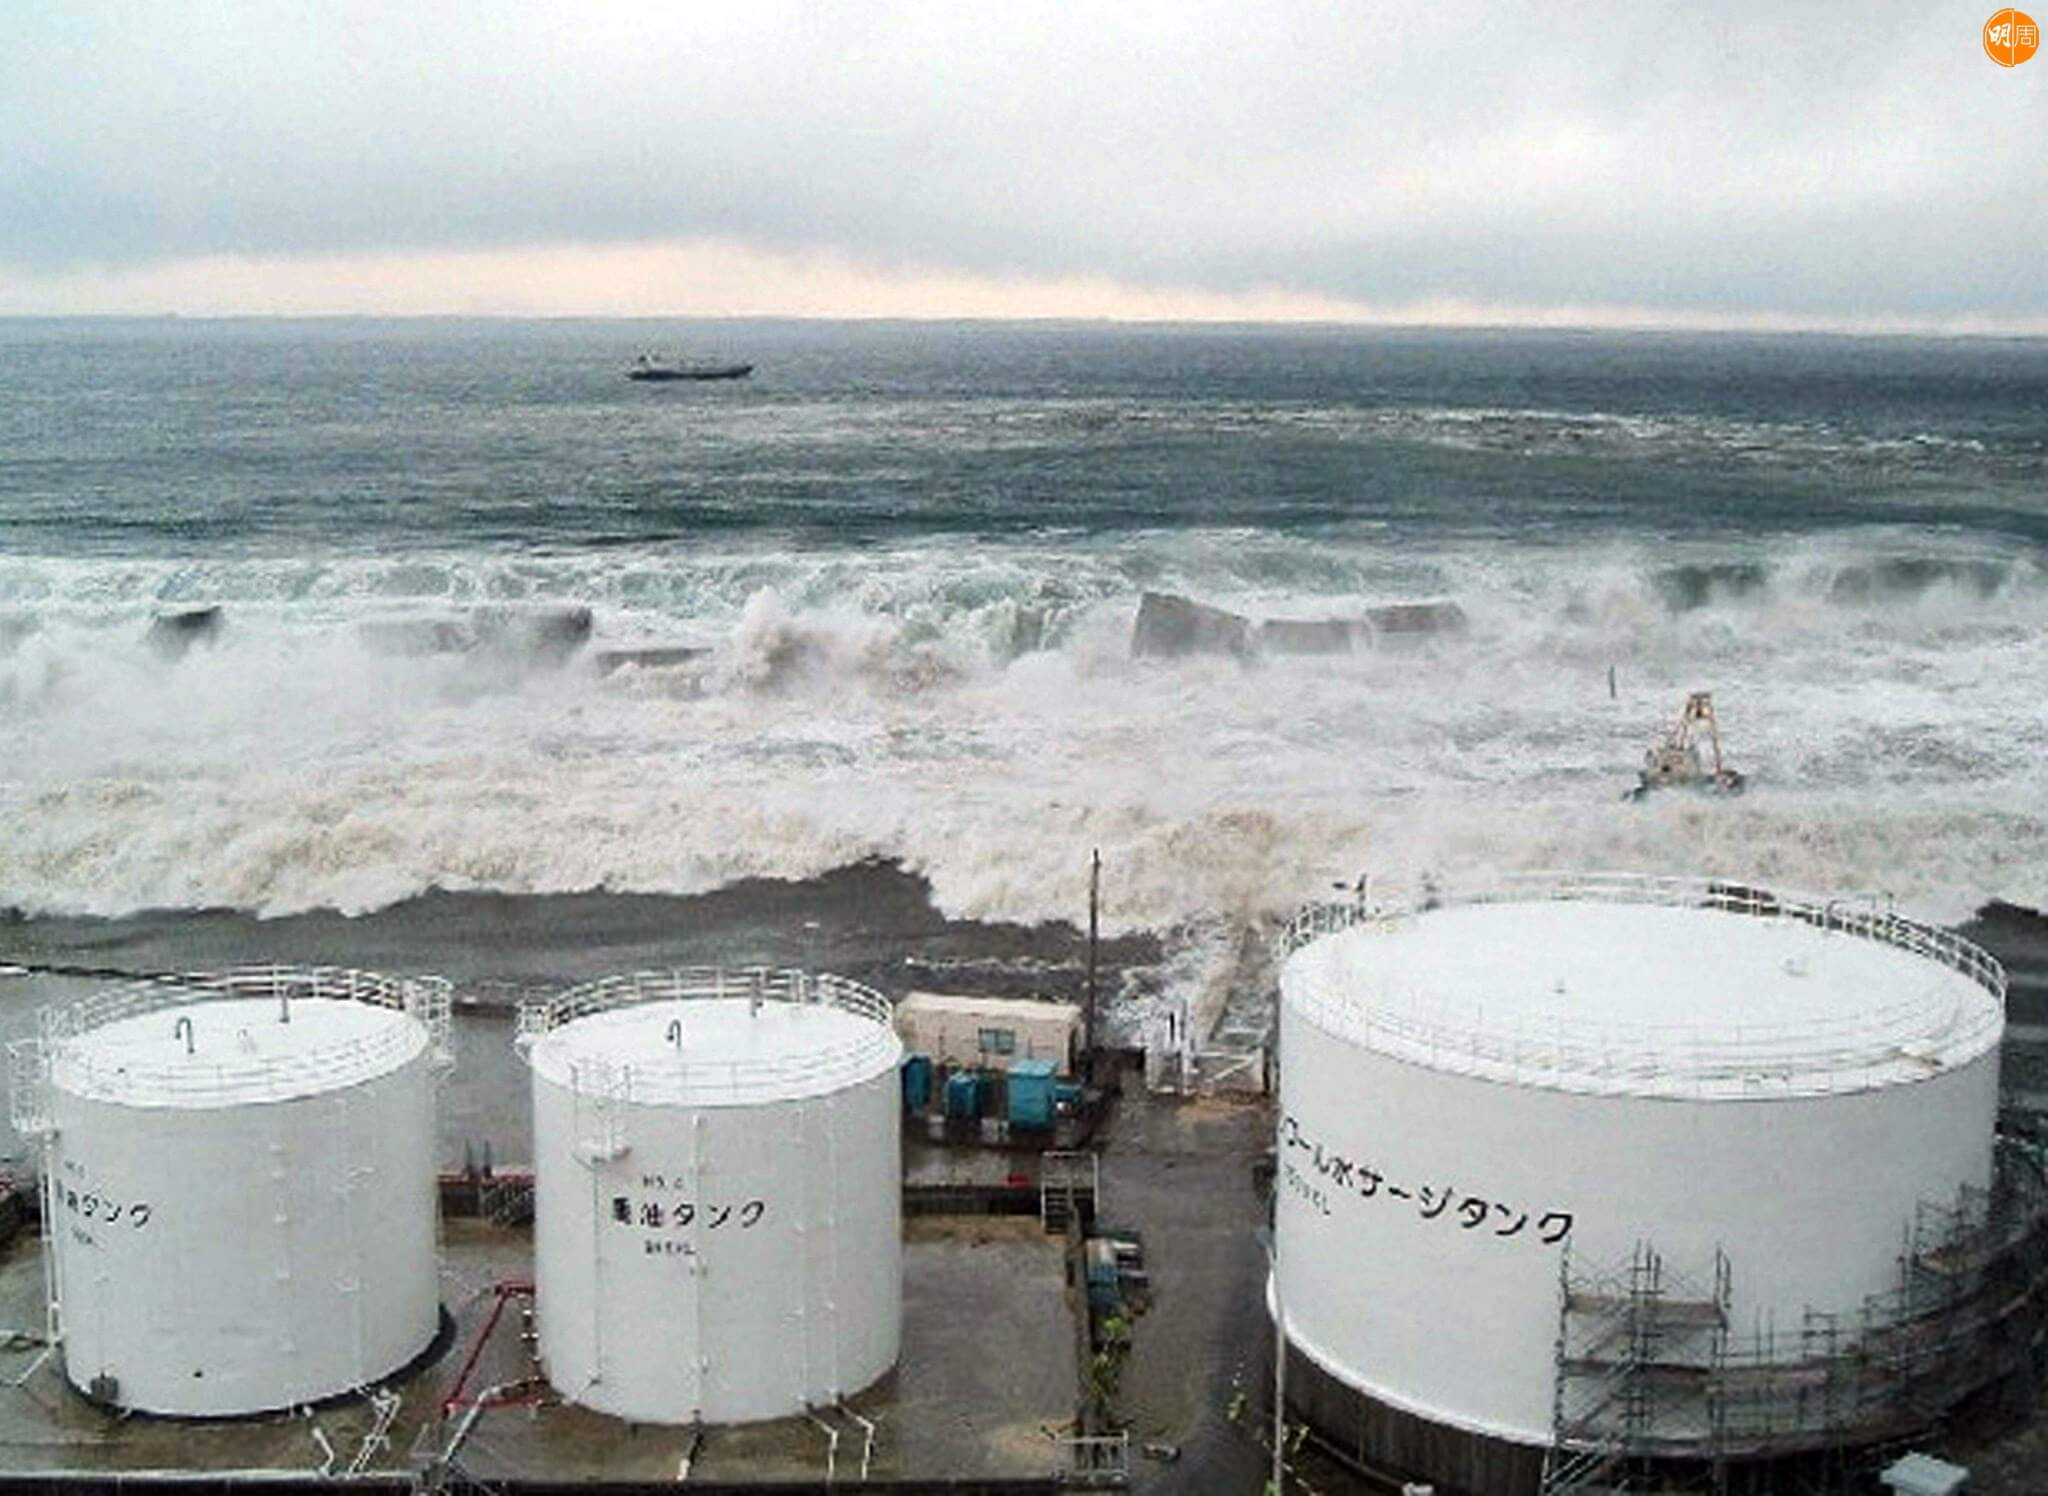 HANDOUT RESTRICTED TO EDITORIAL USE - MANDATORY CREDIT "AFP PHOTO / HO / TEPCO VIA JIJI PRESS" - NO MARKETING NO ADVERTISING CAMPAIGNS - DISTRIBUTED AS A SERVICE TO CLIENTS This picture, taken by Tokyo Electric Power Co (TEPCO) on March 11, 2011 and released on May 19, shows tsunami flowing over the sea walls as the mass of water powers towards TEPCO's Fukushima Daiichi nuclear power plant at Okuma town in Fukushima prefecture. Workers briefly entered a reactor building at Japan's stricken Fukushima nuclear power plant to measure radiation levels and check for damage, the operator said. The investigation was part of work by Tokyo Electric Power Co. (TEPCO) to bring reactors at the complex to a stable cold shutdown by January at the latest. AFP PHOTO / HO / TEPCO VIA JIJI PRESS (Photo by TEPCO / JIJI PRESS / AFP) / - Japan OUT